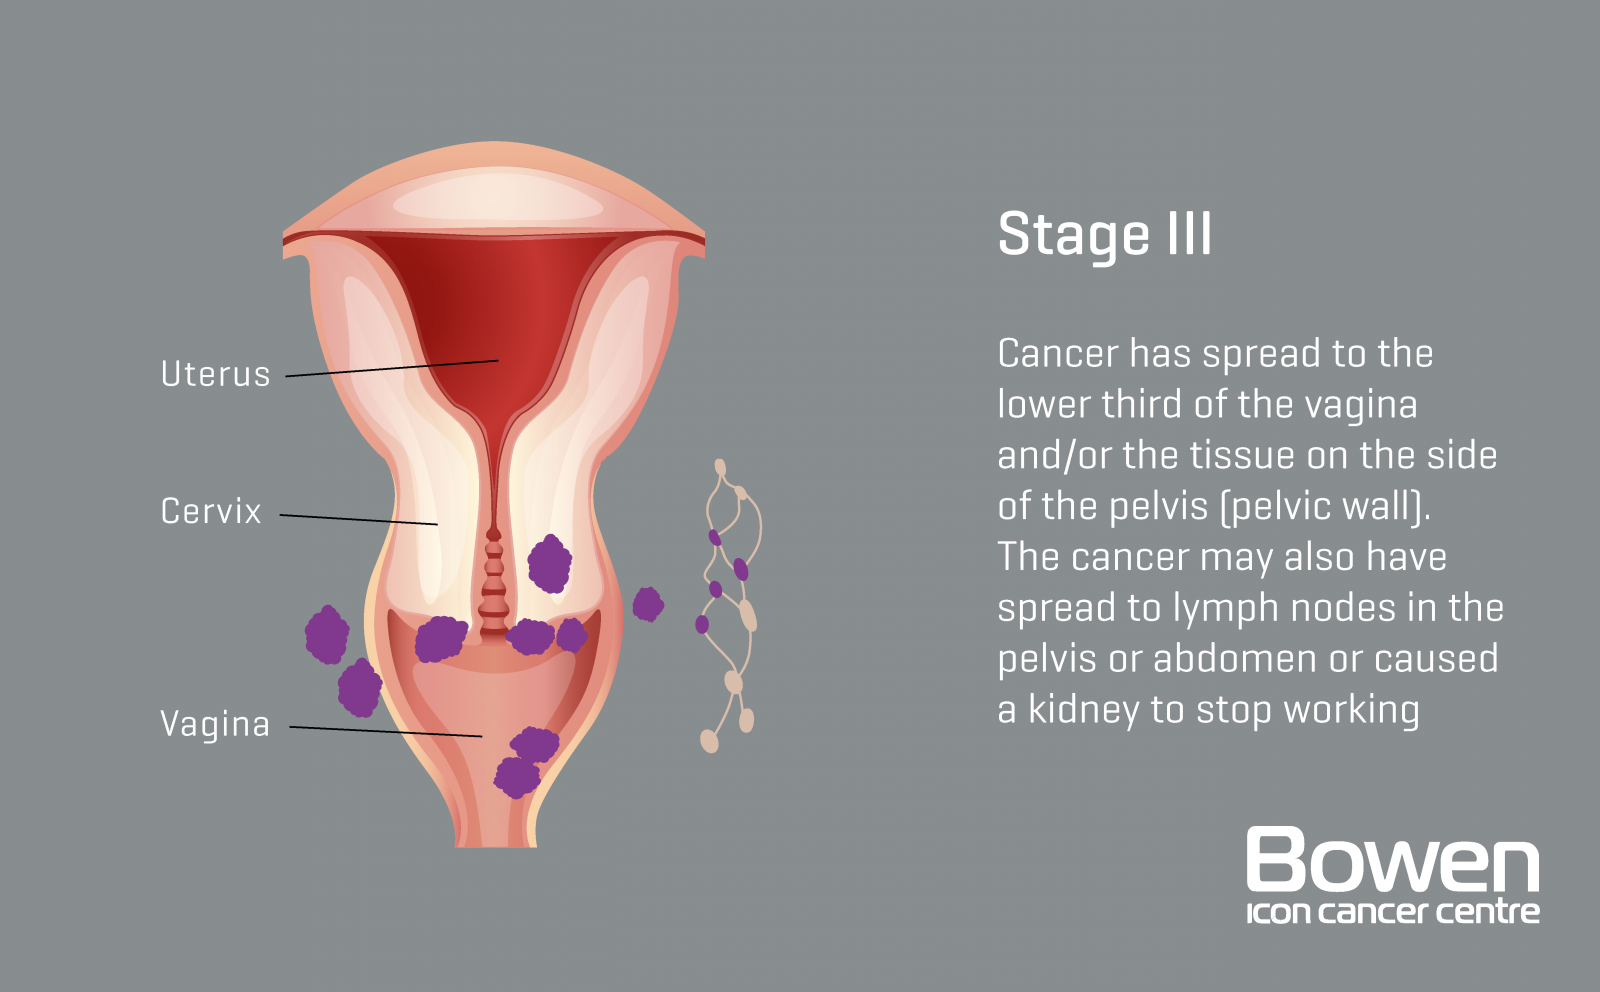 how does hpv cause cervical cancer mechanism